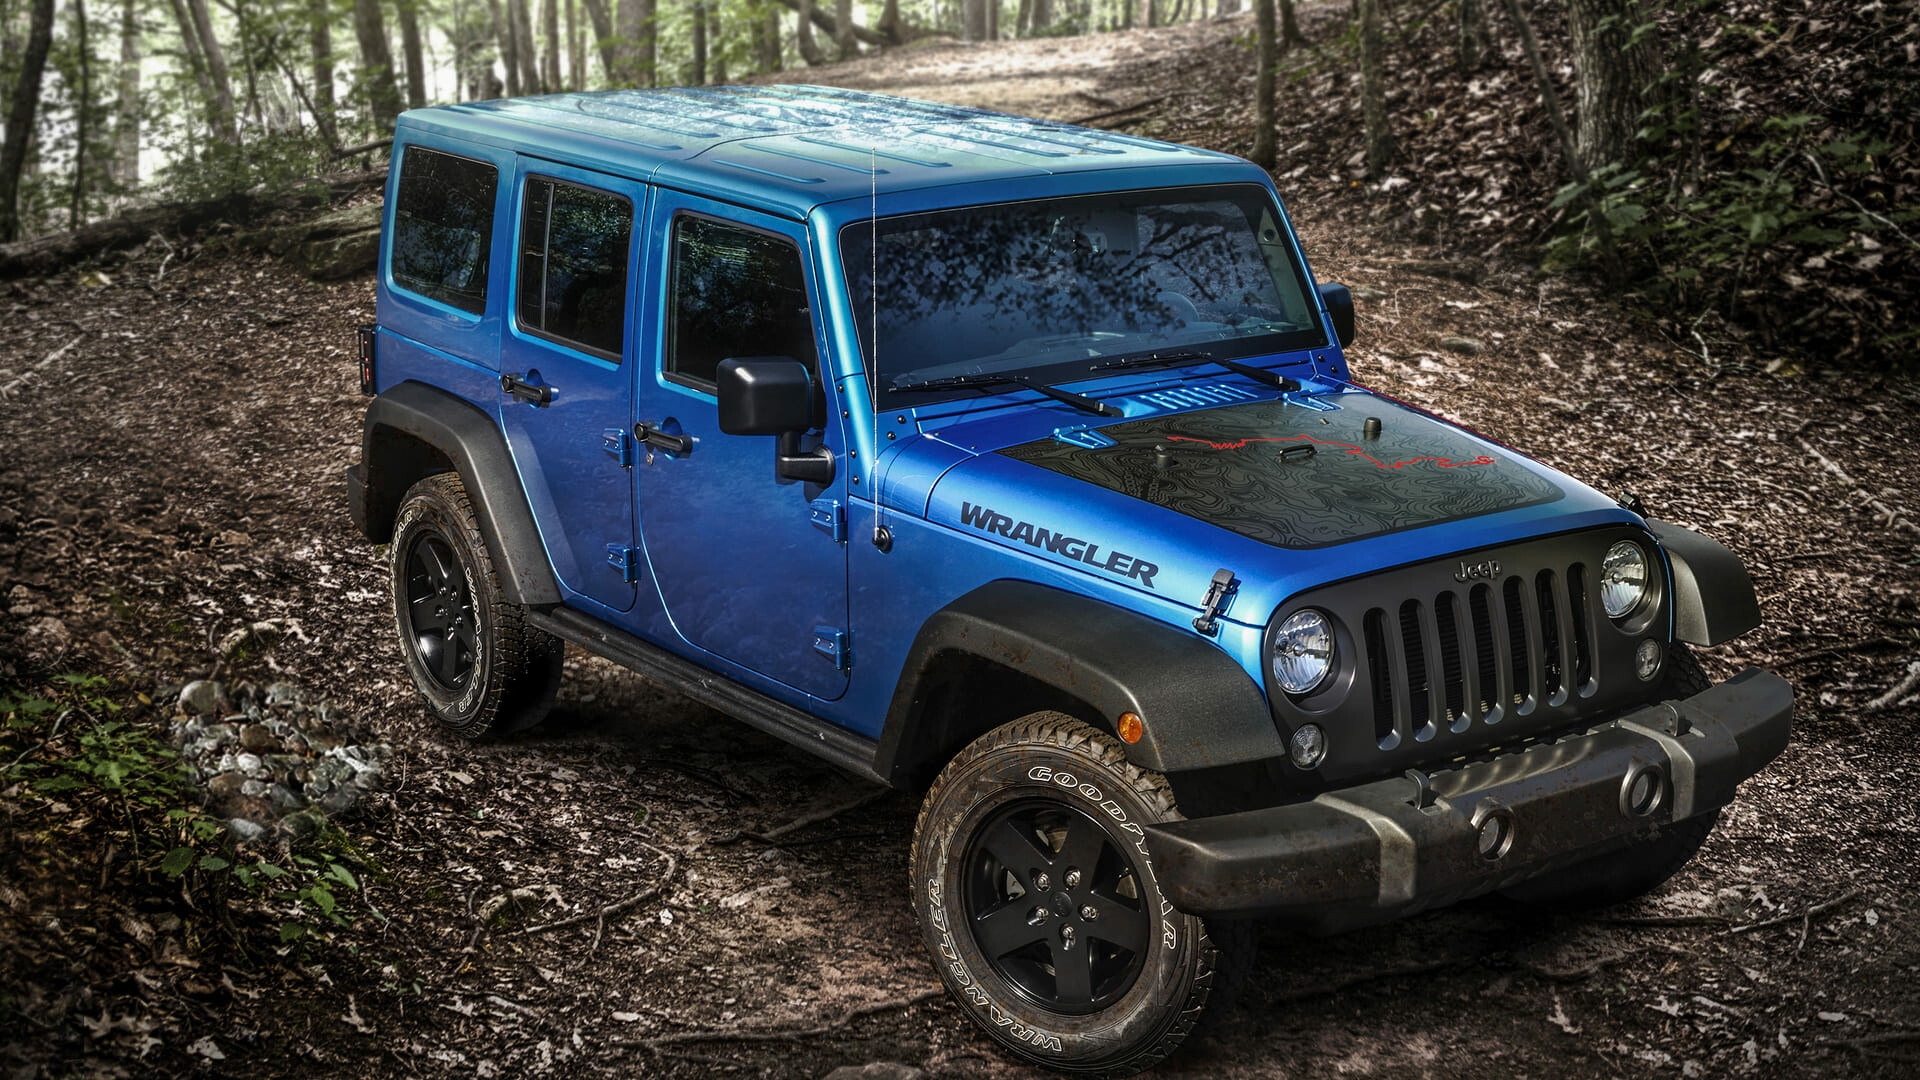 Jeep: Wrangler, The 2019 MotorTrend SUV of the Year. 1920x1080 Full HD Wallpaper.